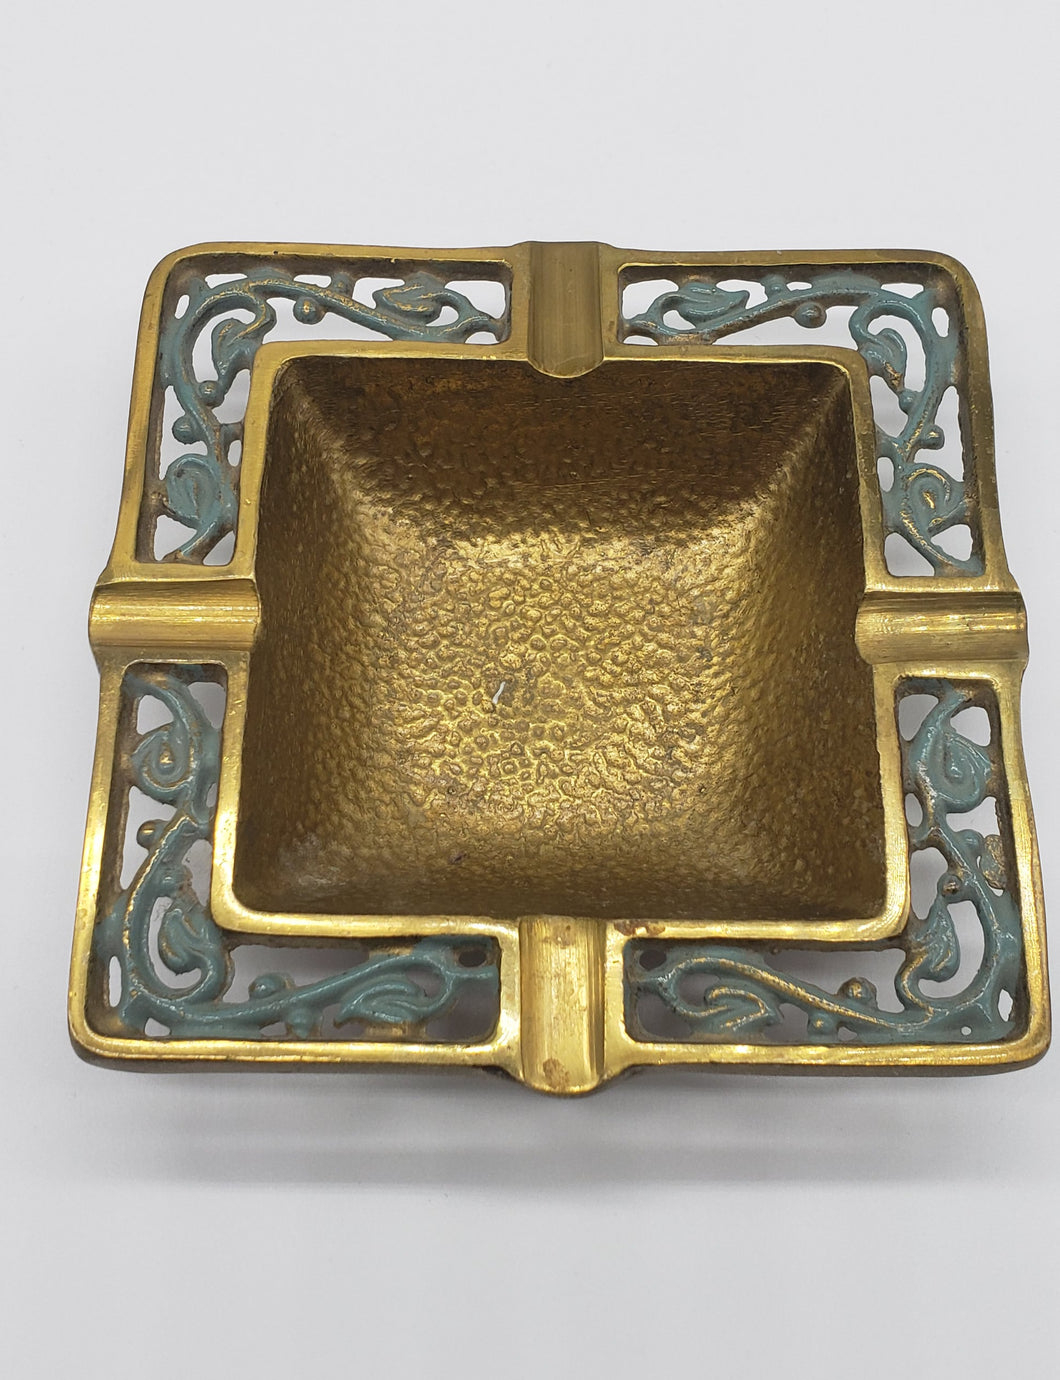 Solid Brass Square Ashtray Made in Israel